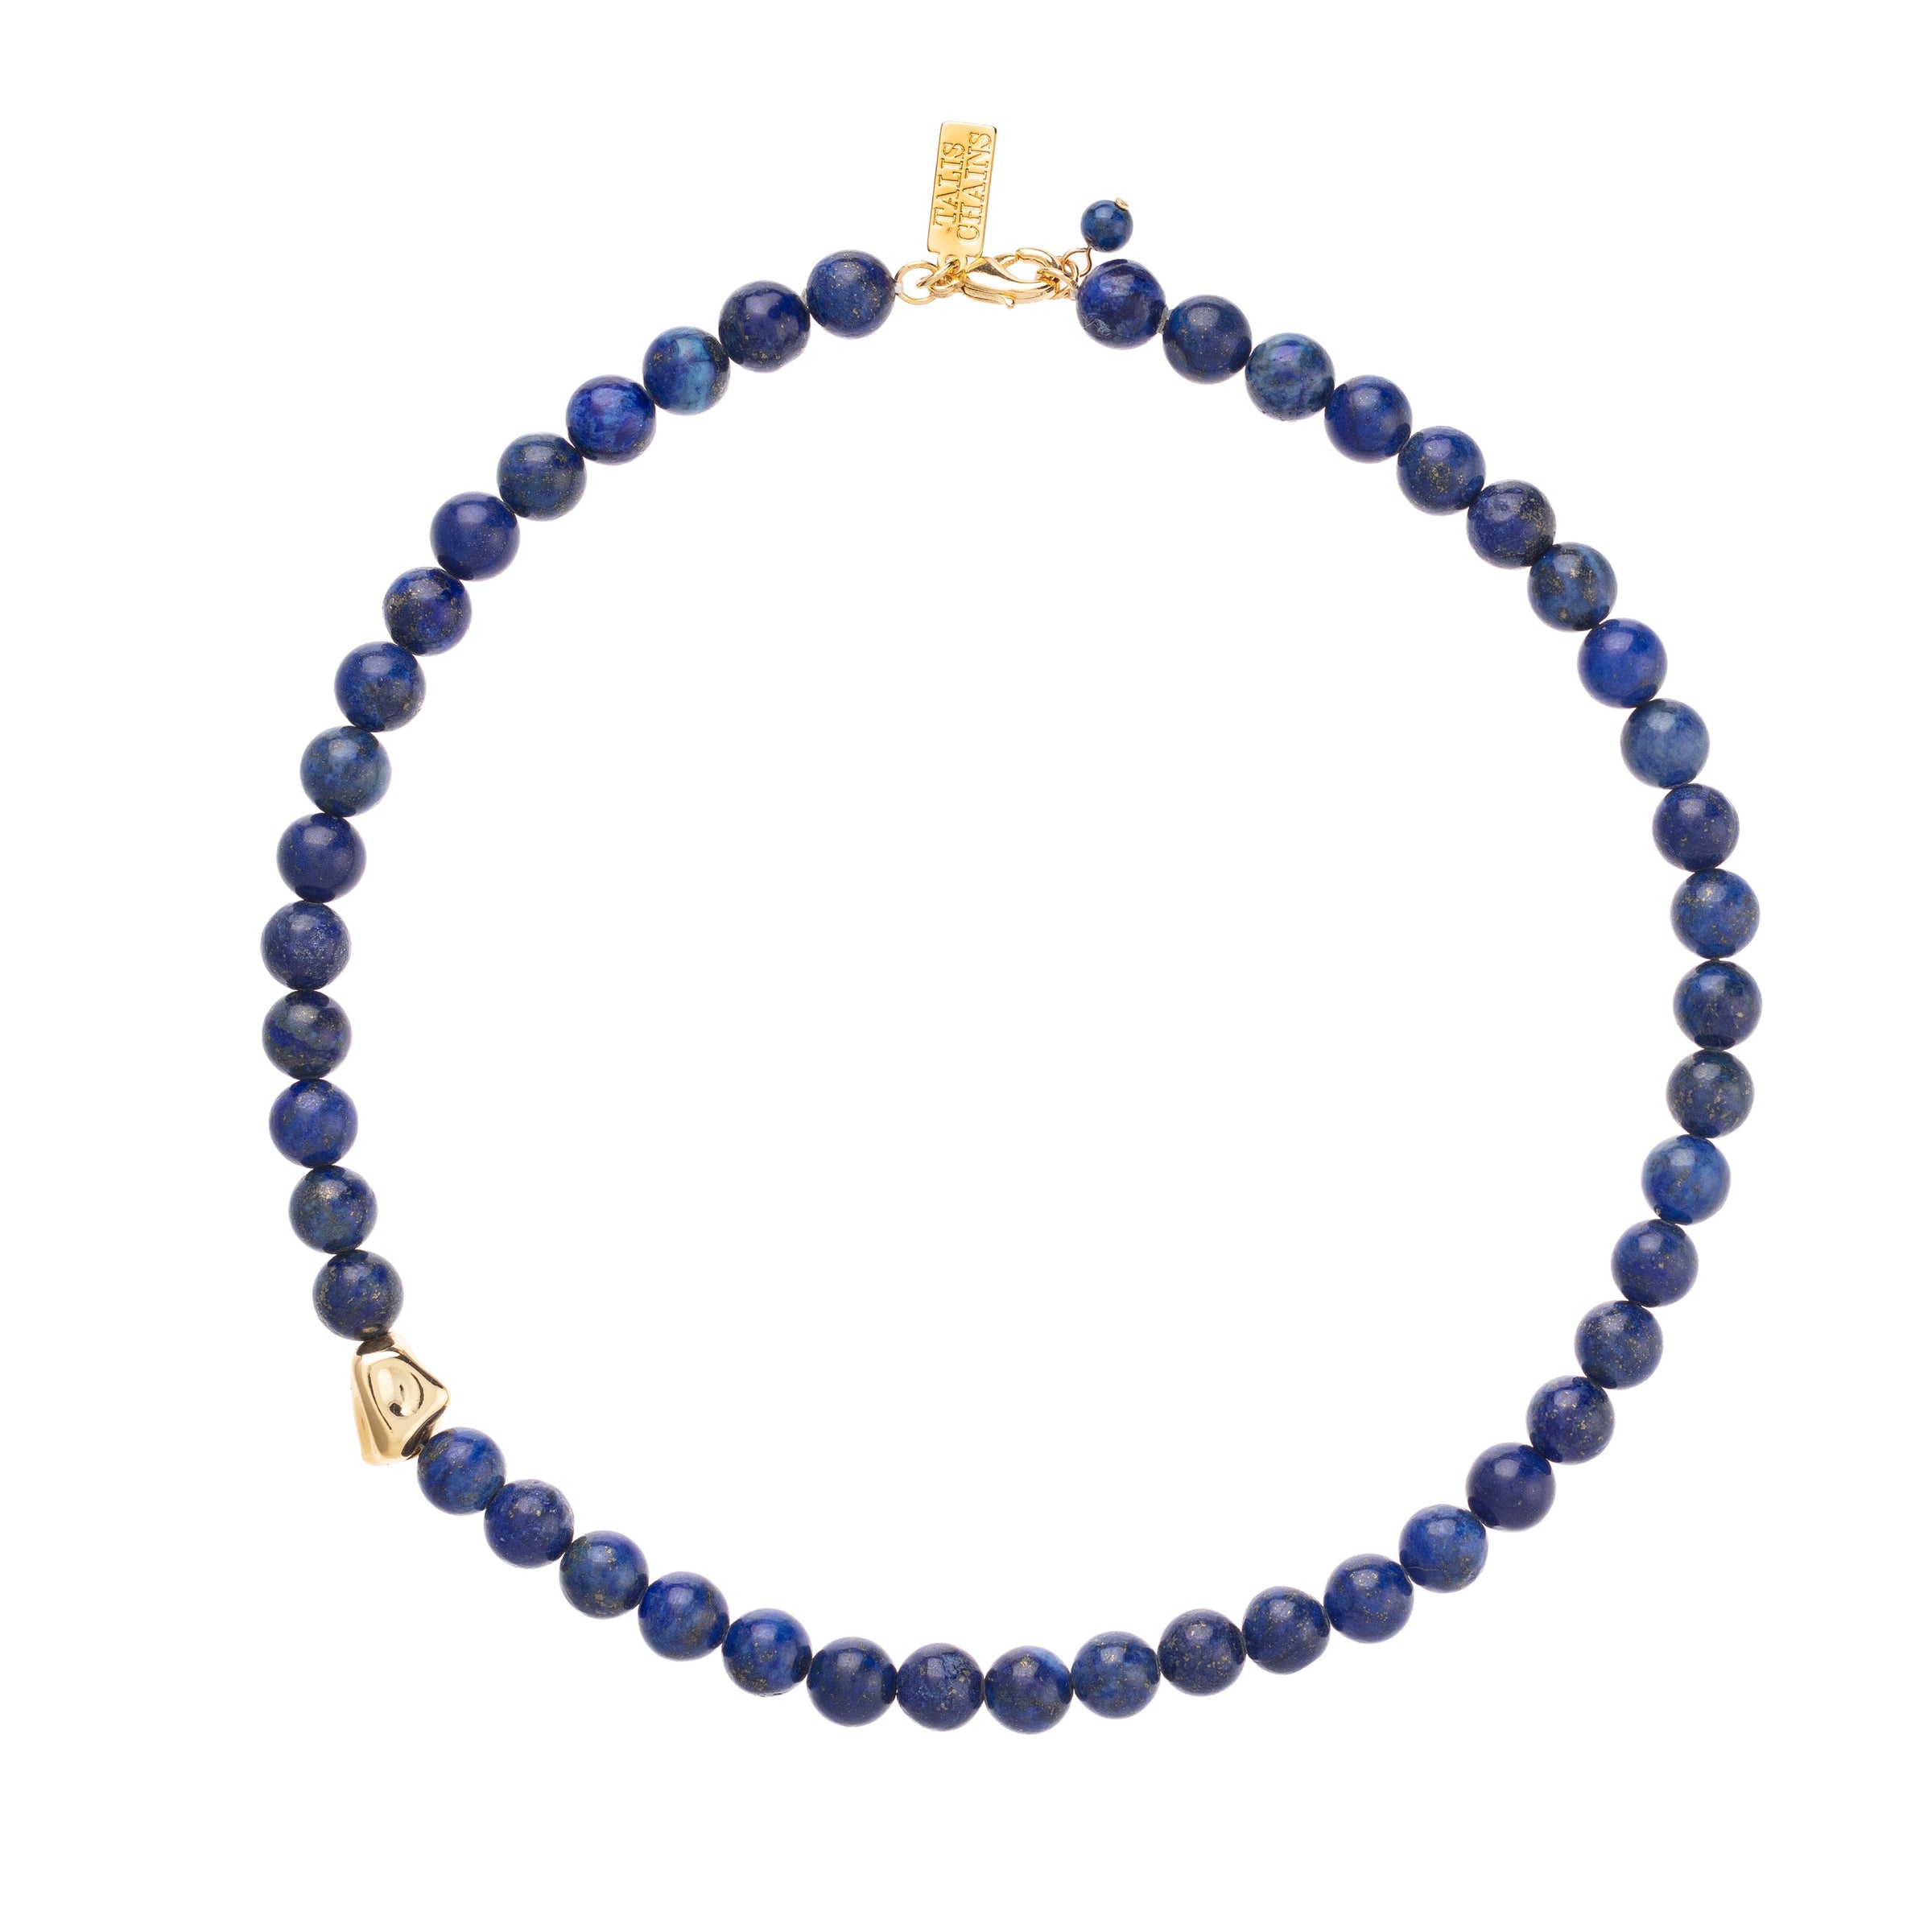 Lapis beaded necklace with gold bead detail and lobster clasp fastening